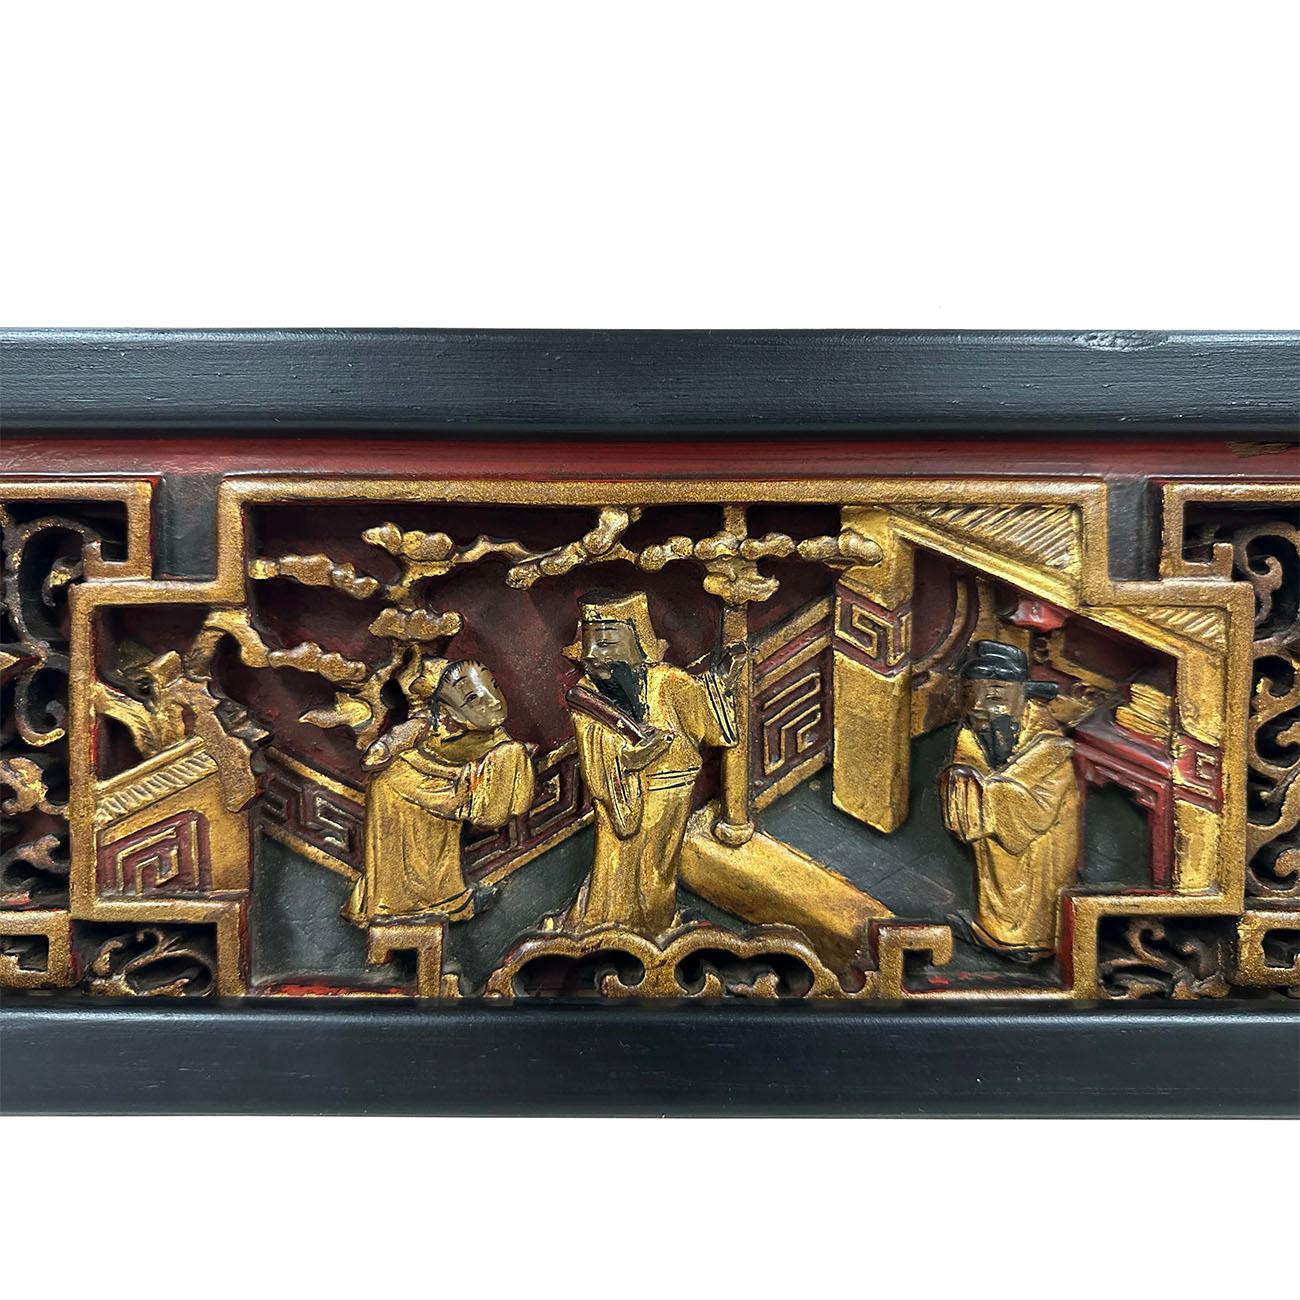 Hand-Carved 19th Century Chinese 3d Carving Wood Panel Hanging Architectural Element